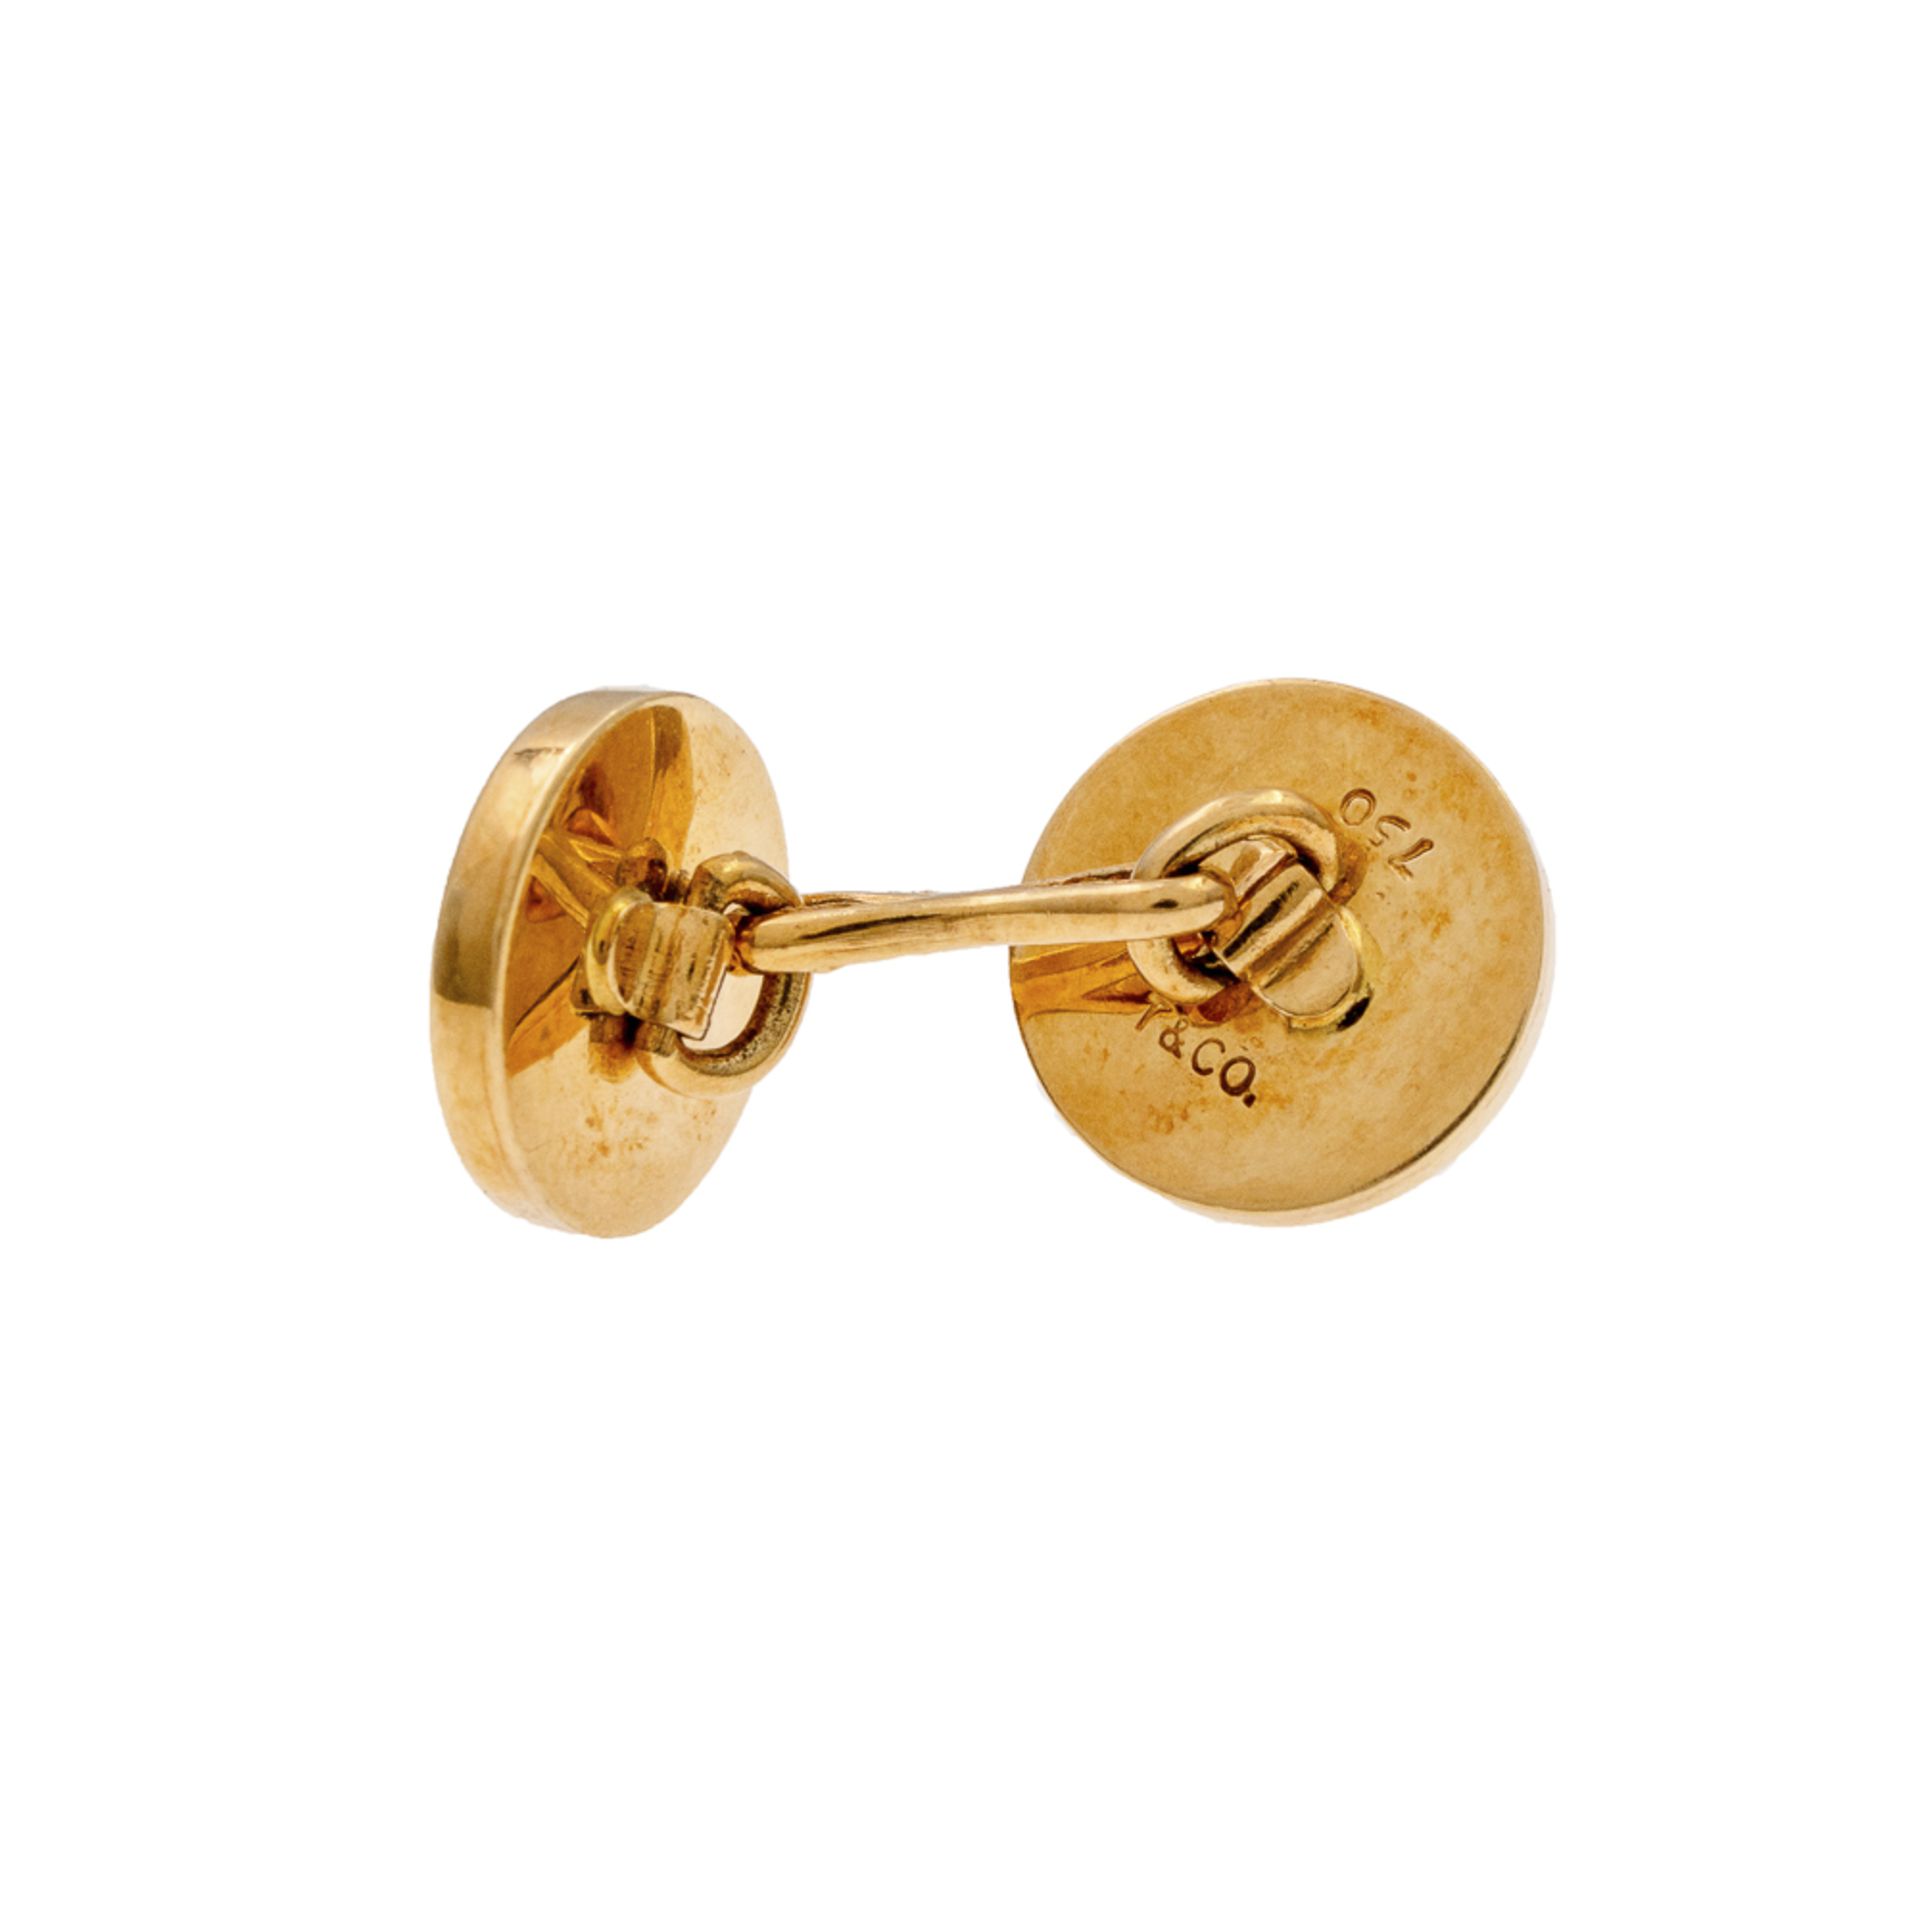 Tiffany & Co. 18kt yellow gold and mother-of-pearl cufflinks - Image 2 of 2